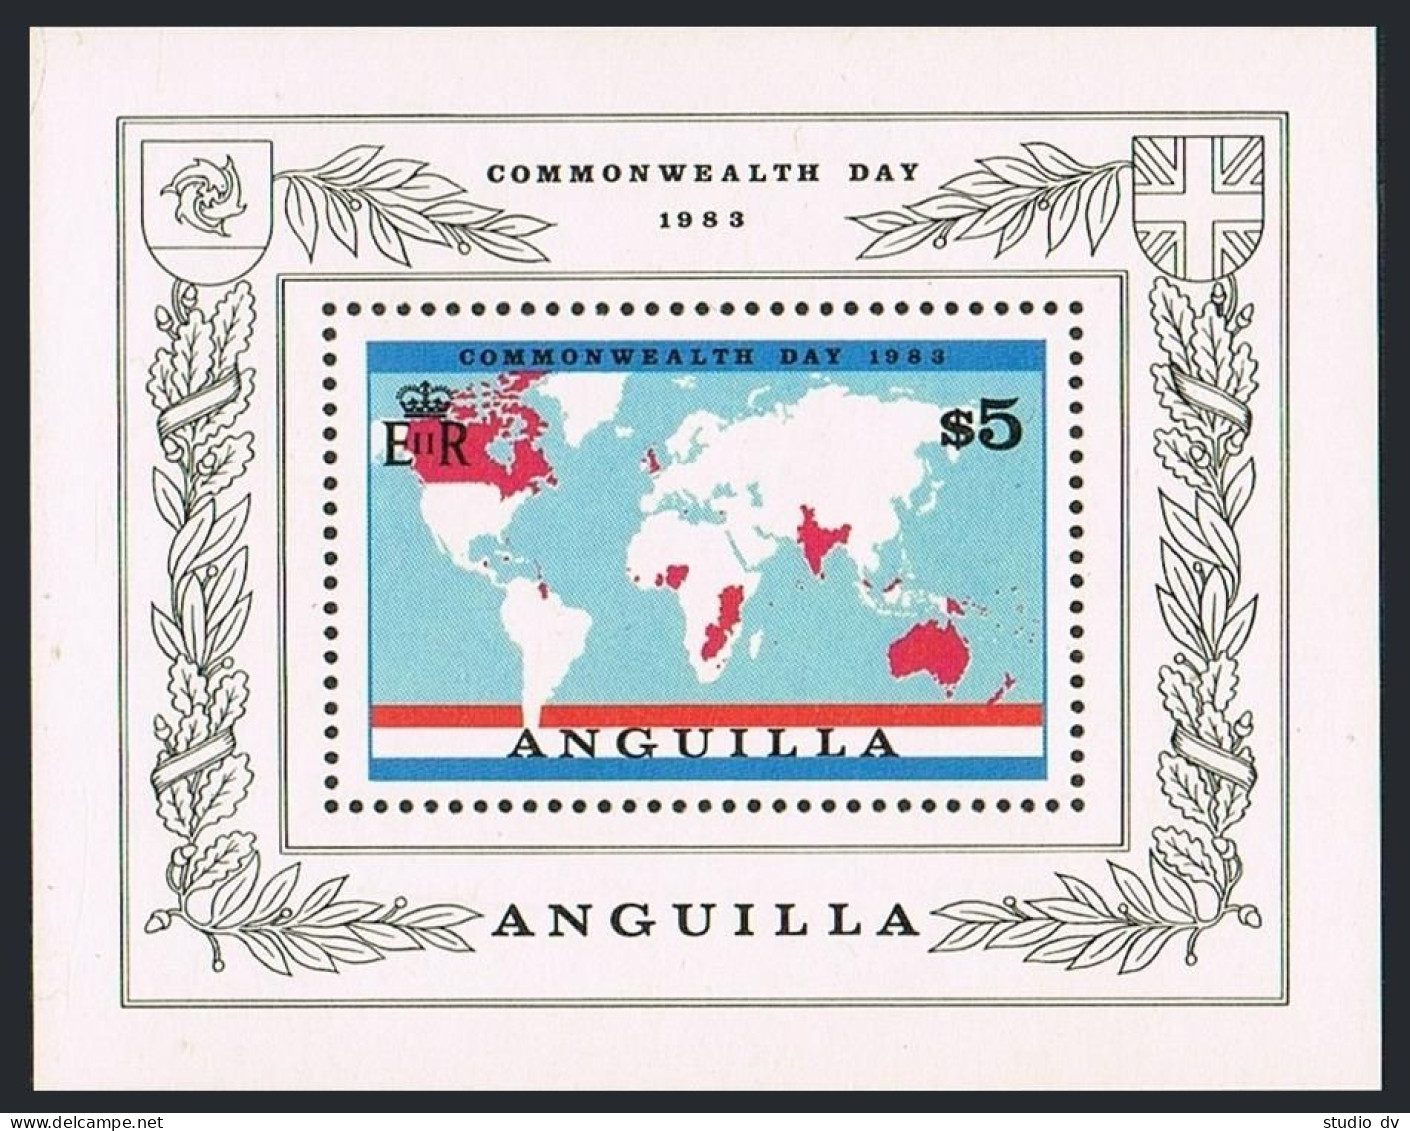 Anguilla 521-524 Gutter,525,MNH. Commonwealth Day 1983.Carnival,Flags,Salt Pond, - Anguilla (1968-...)